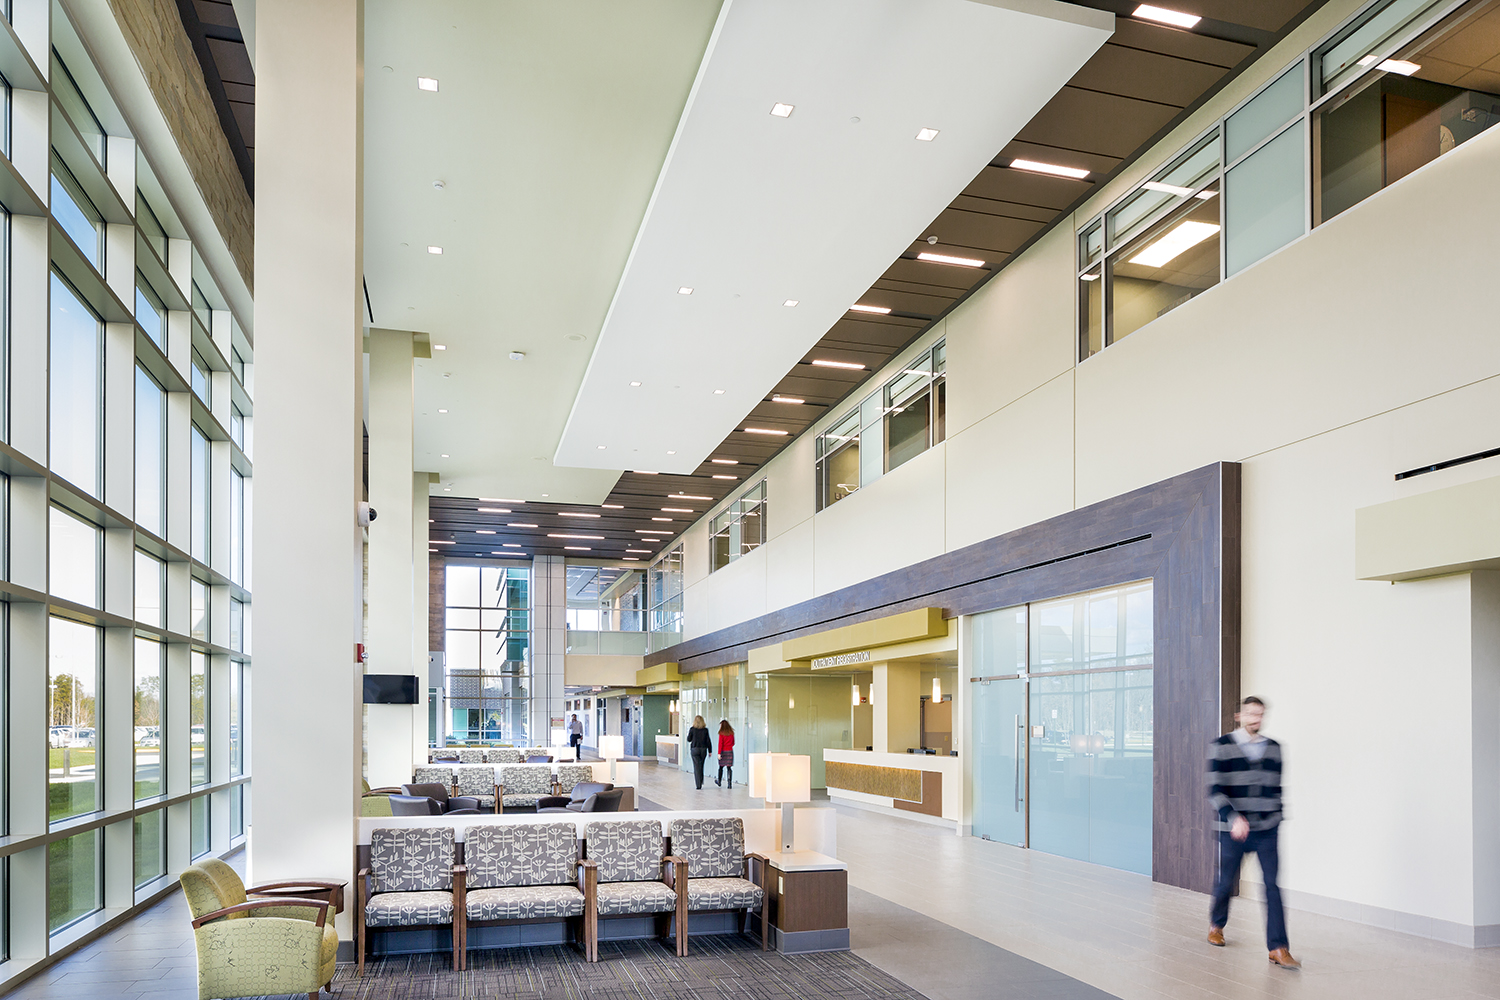 Serenity table lamps provide comforting healthcare design in a large waiting area and hospital corridor.